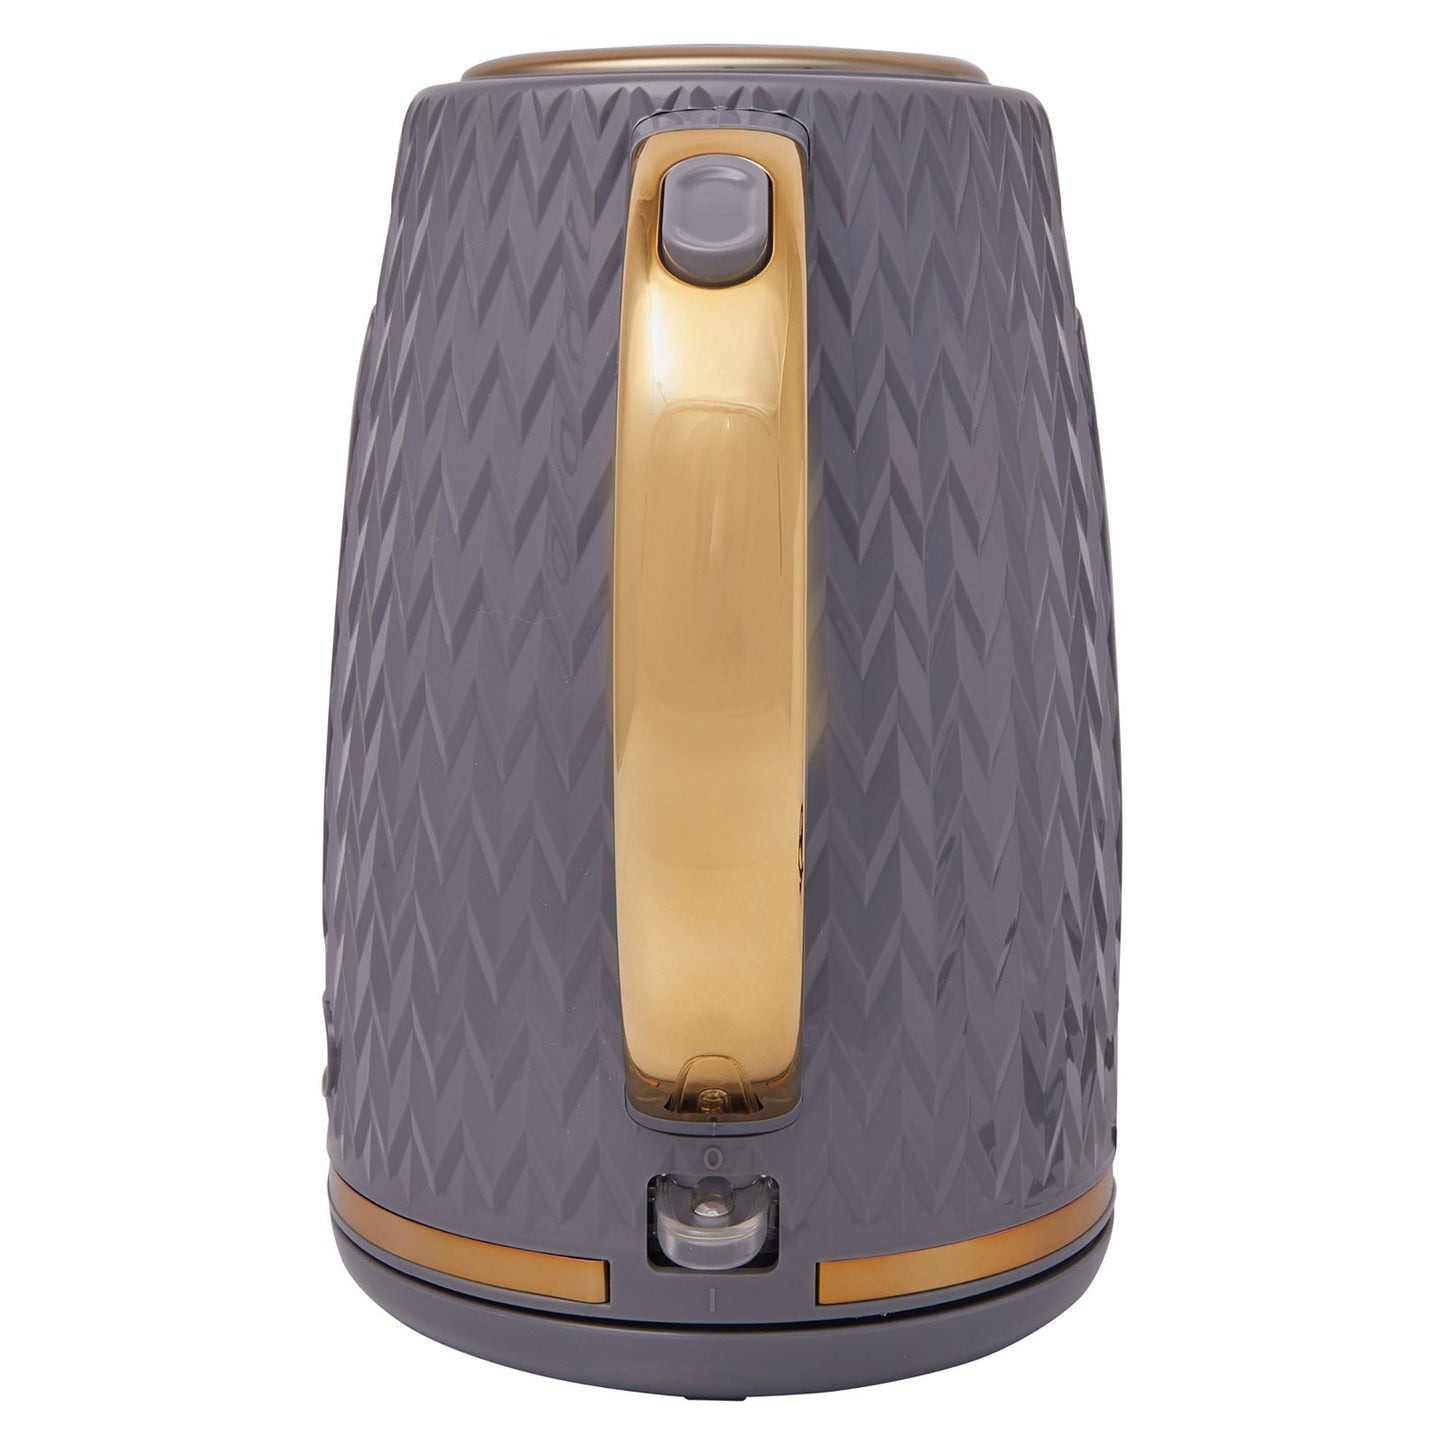 Westinghouse Kettle and Toaster Pack Grey Gold 1.7L Kettle, 4 Slice Toaster -  -  